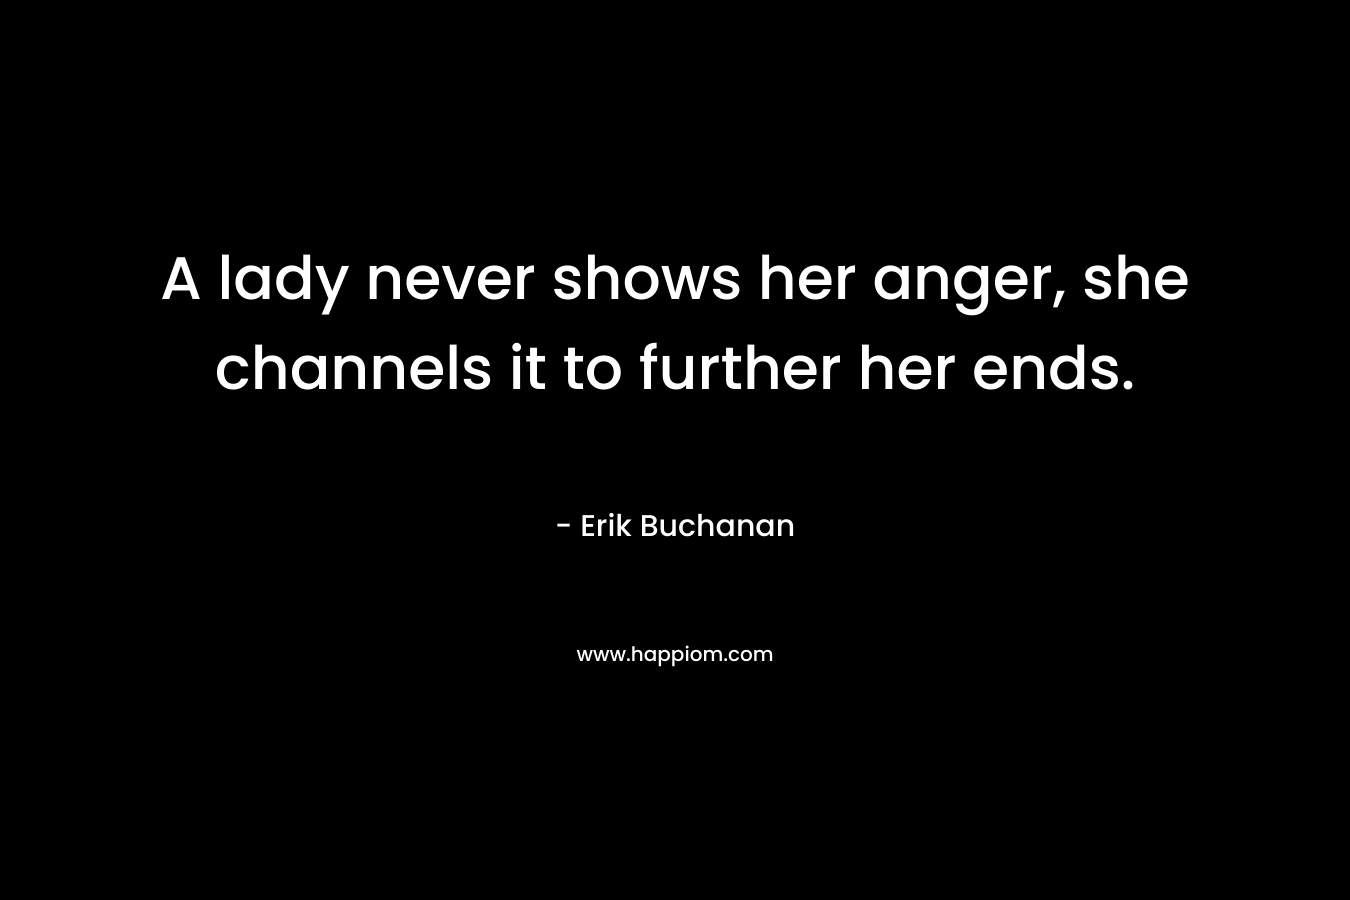 A lady never shows her anger, she channels it to further her ends.